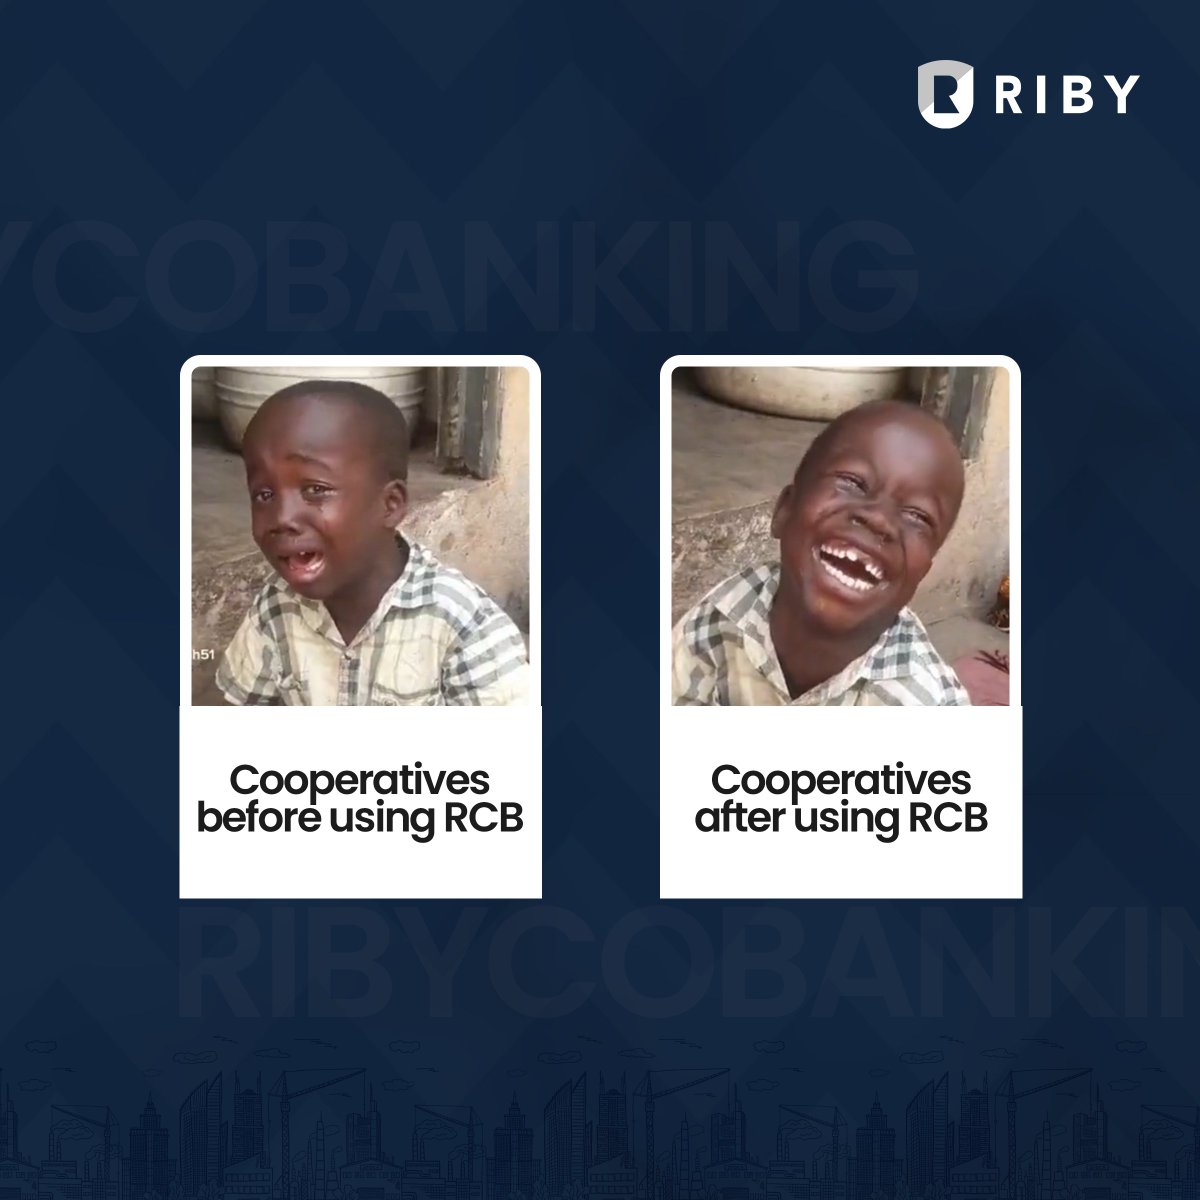 Cooperative activities like contributions, withdrawals, record management, loan repayment etc have been seamless and easy on RIBY CoBanking. To get started, call 08092222109 or visit riby.ng #bettertogether